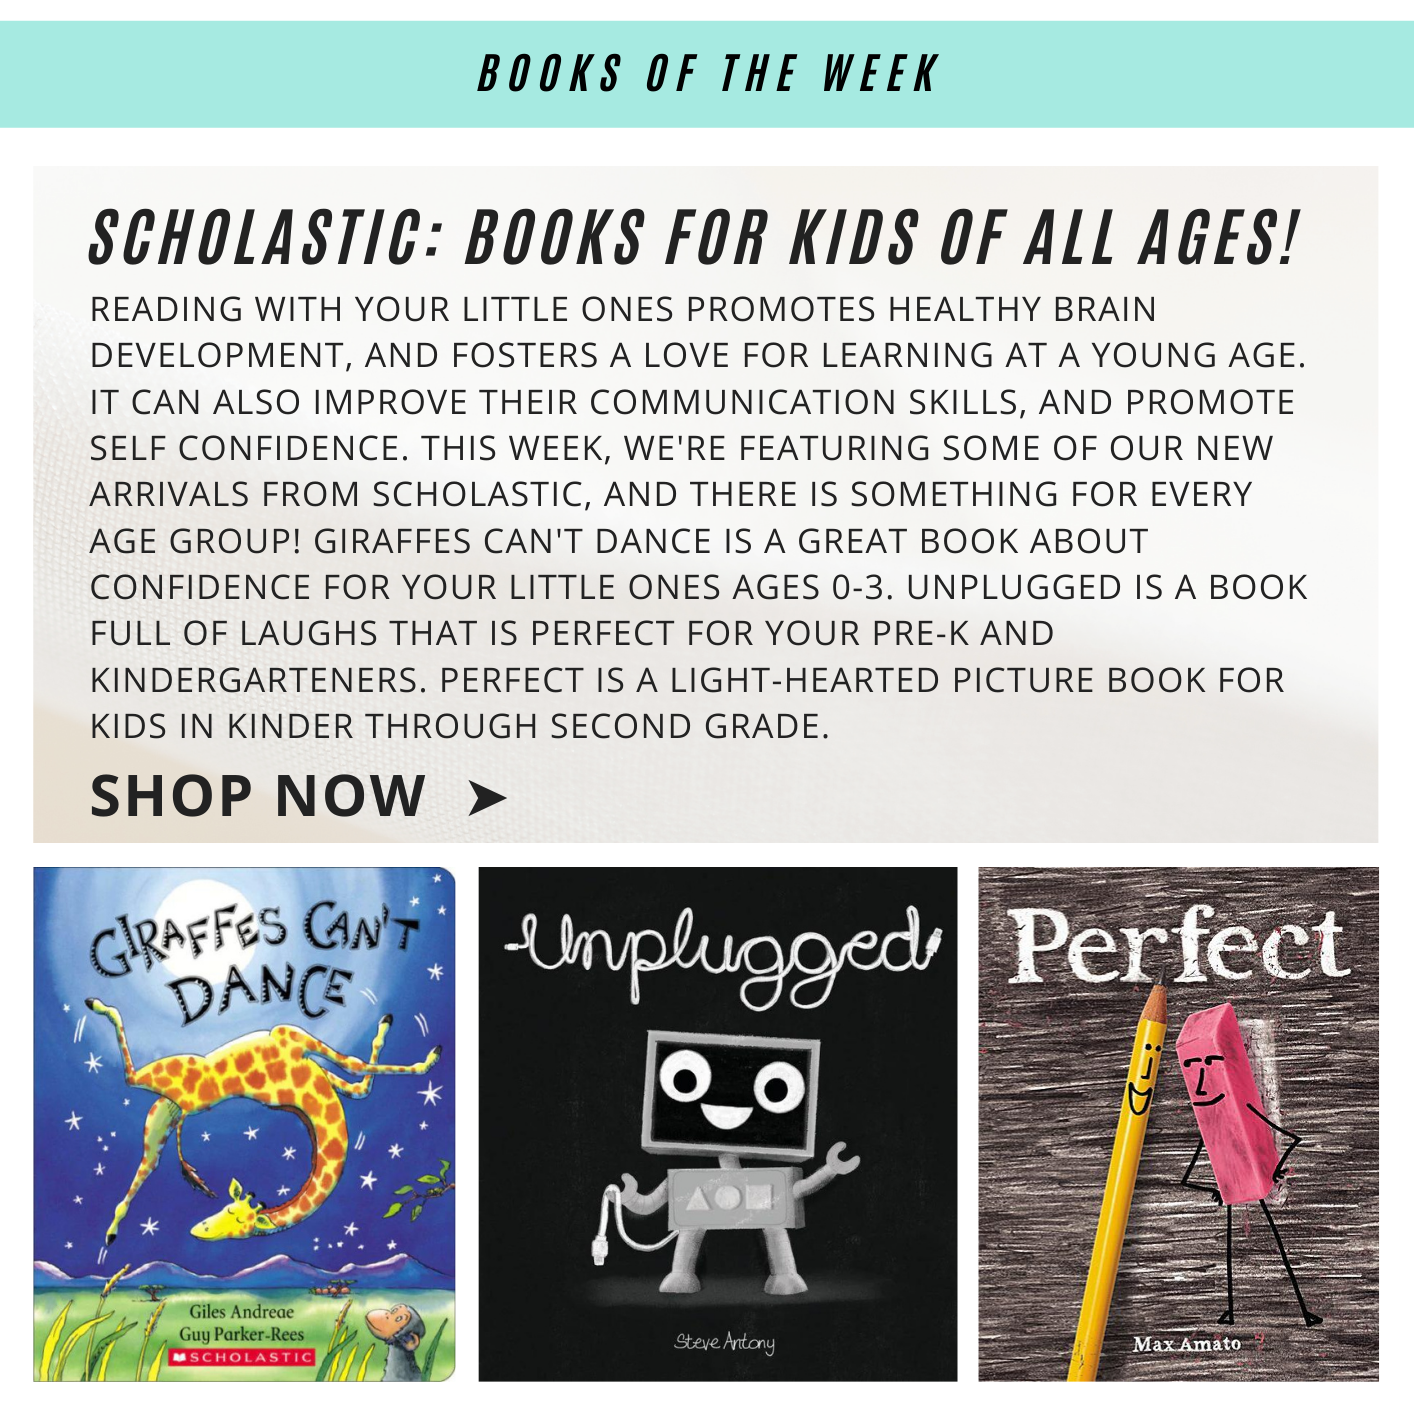 featured books of the week scholastic books for all ages